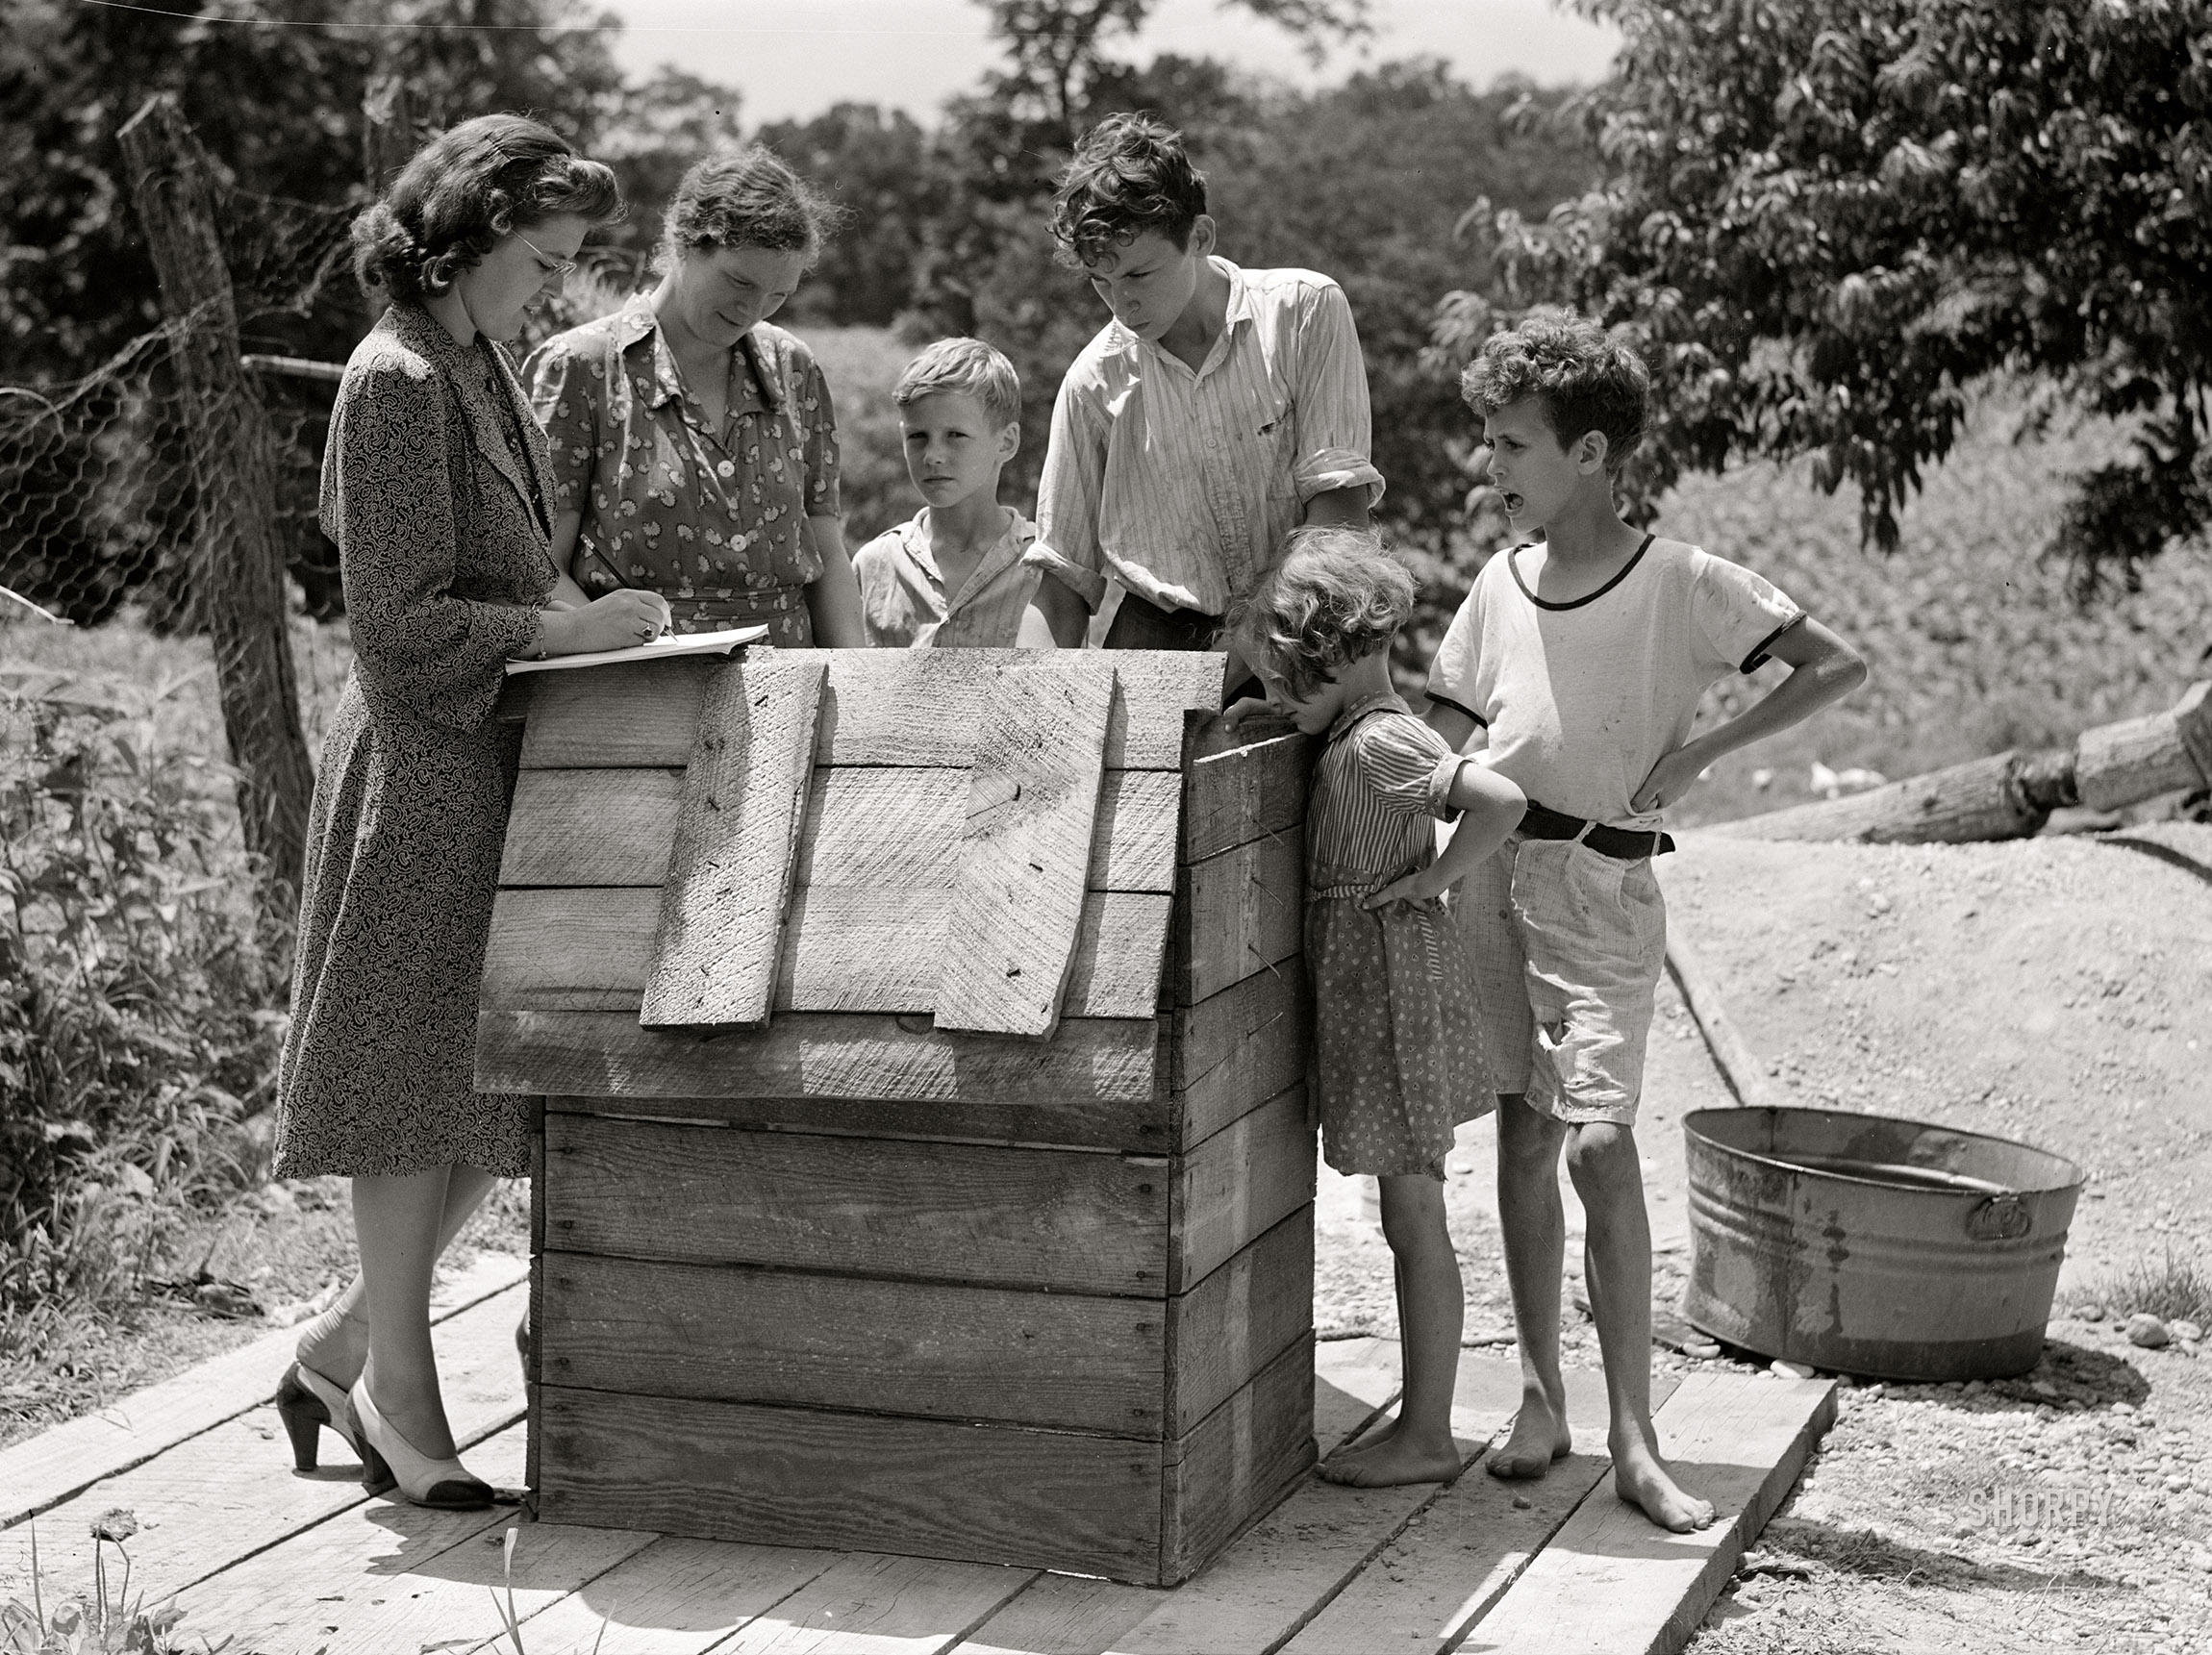 July 1941. "Home supervisor, while making home visit to FSA borrower, inspects water supply for repair. Charles County near La Plata, Maryland." Medium format acetate negative by Marion Post Wolcott for the Farm Security Administration. View full size.